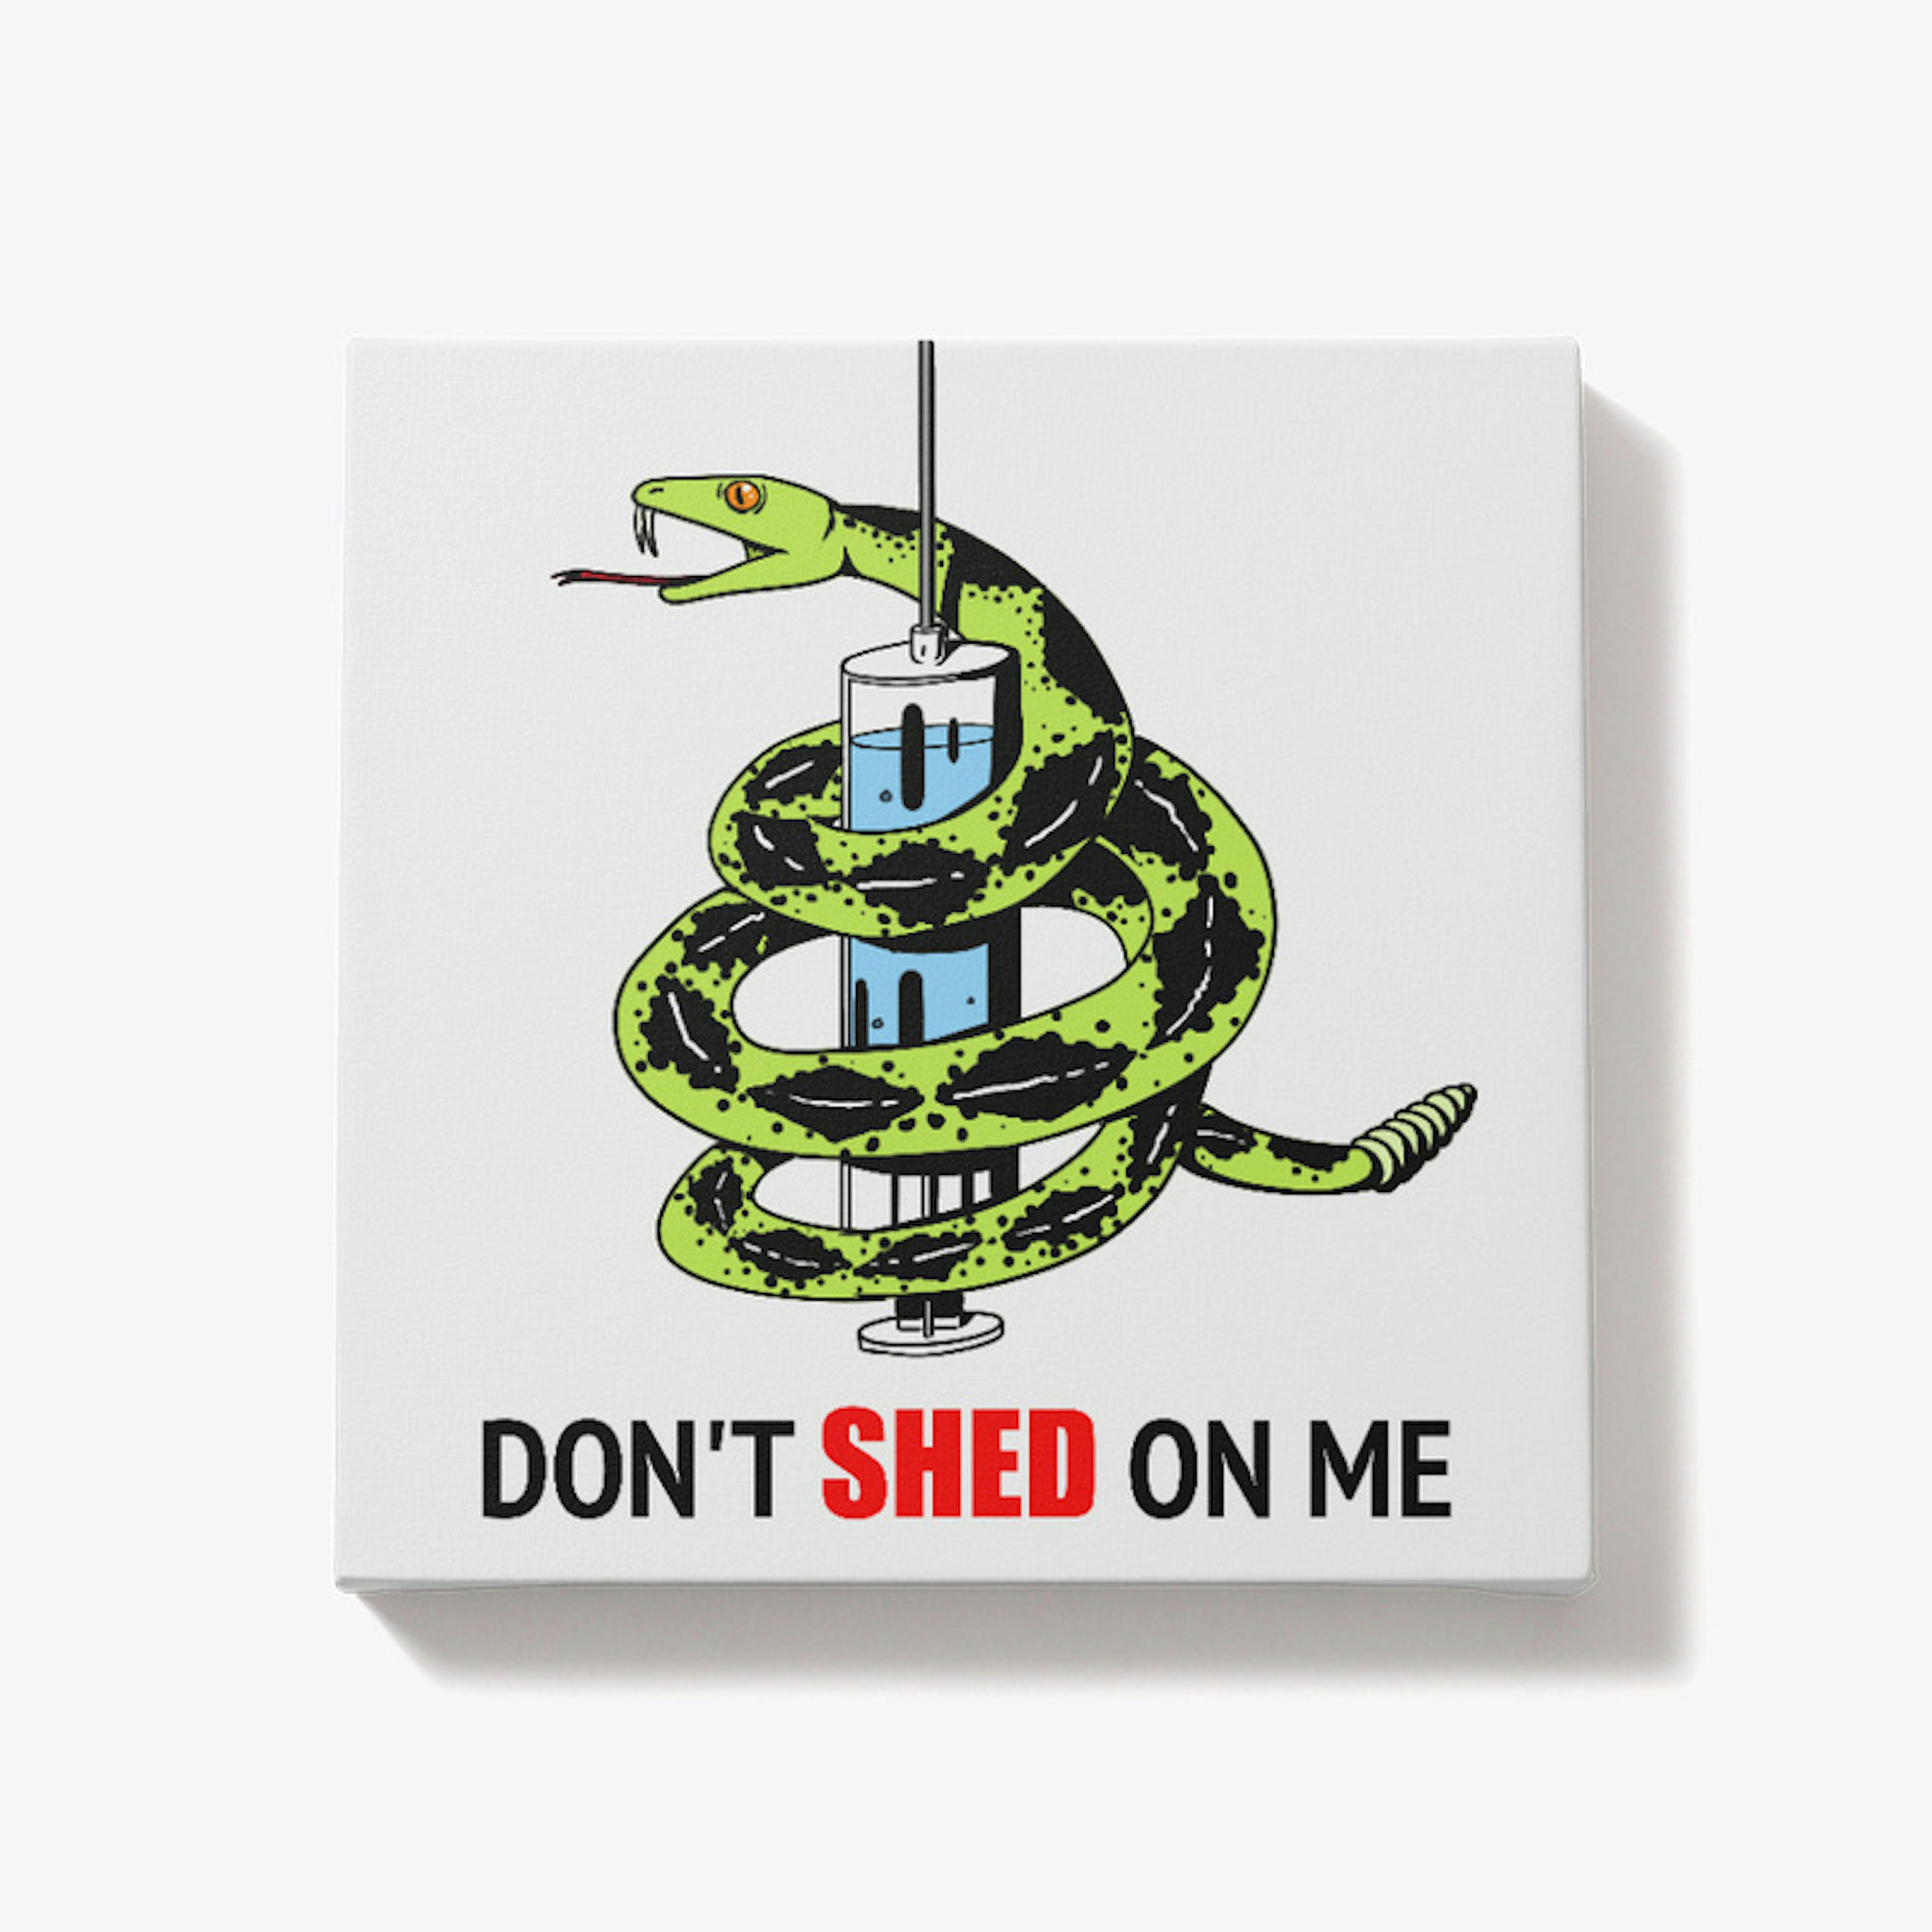 DON'T SHED ON ME